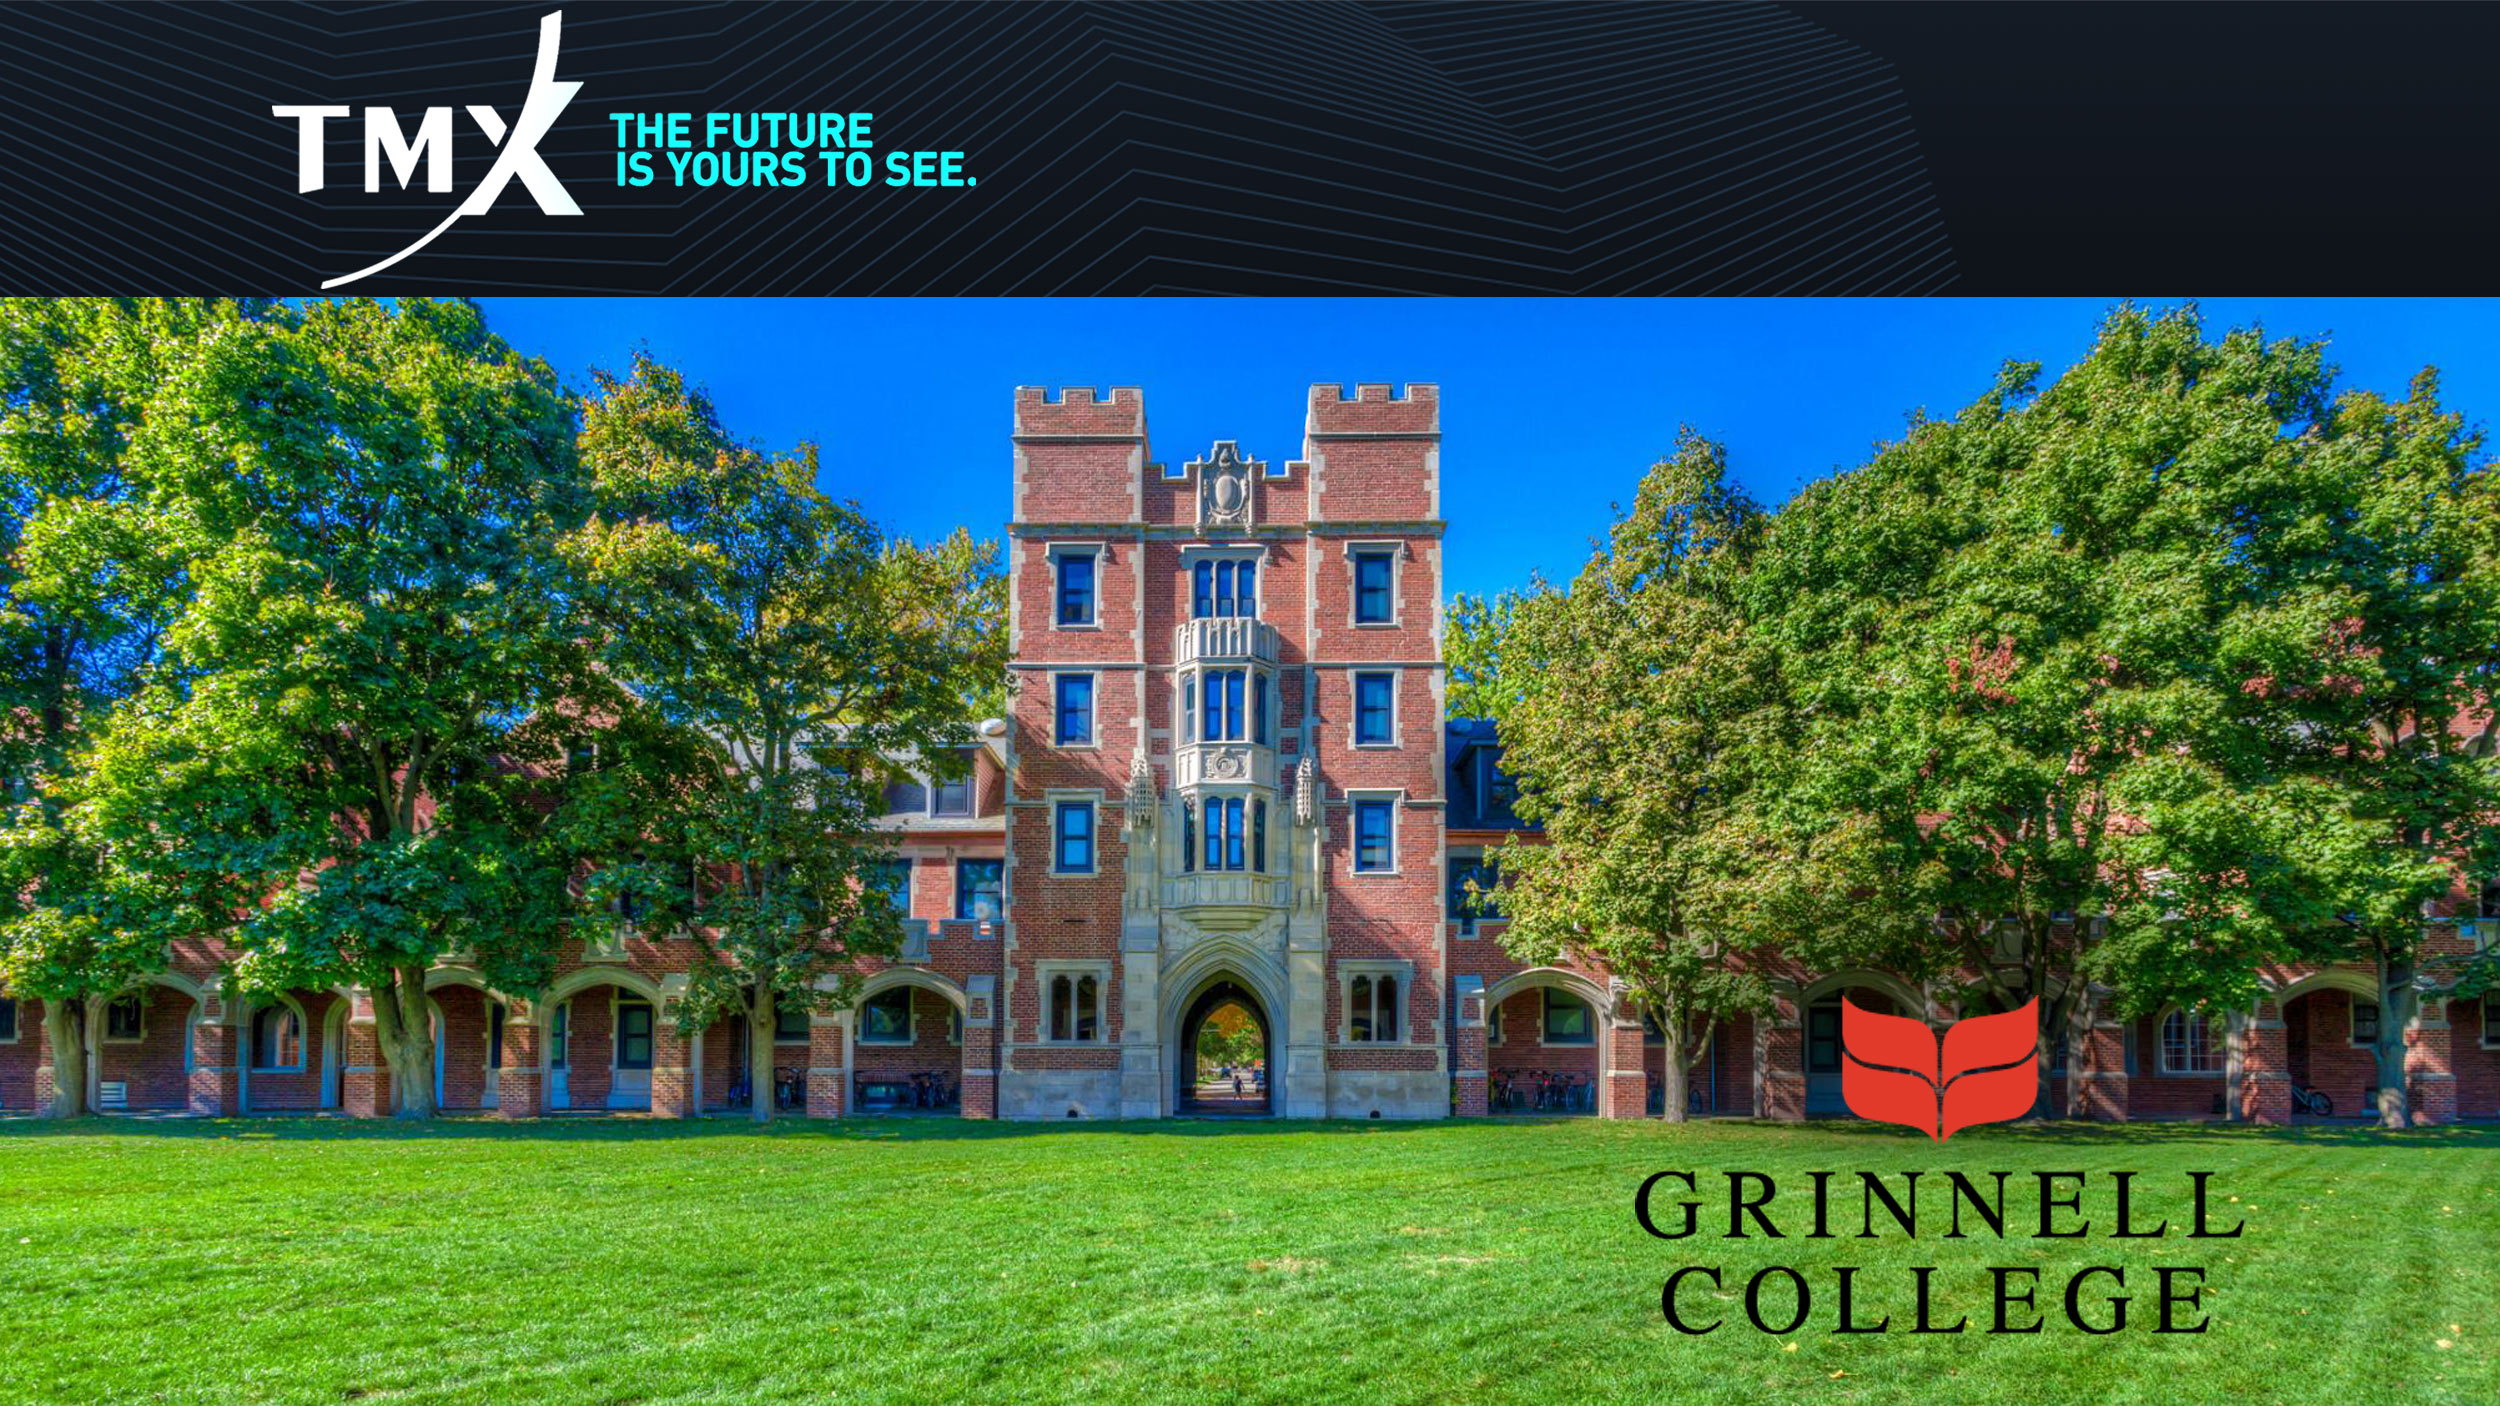 grinnell-college-selects-prostar-s-solution-to-manage-150-year-old